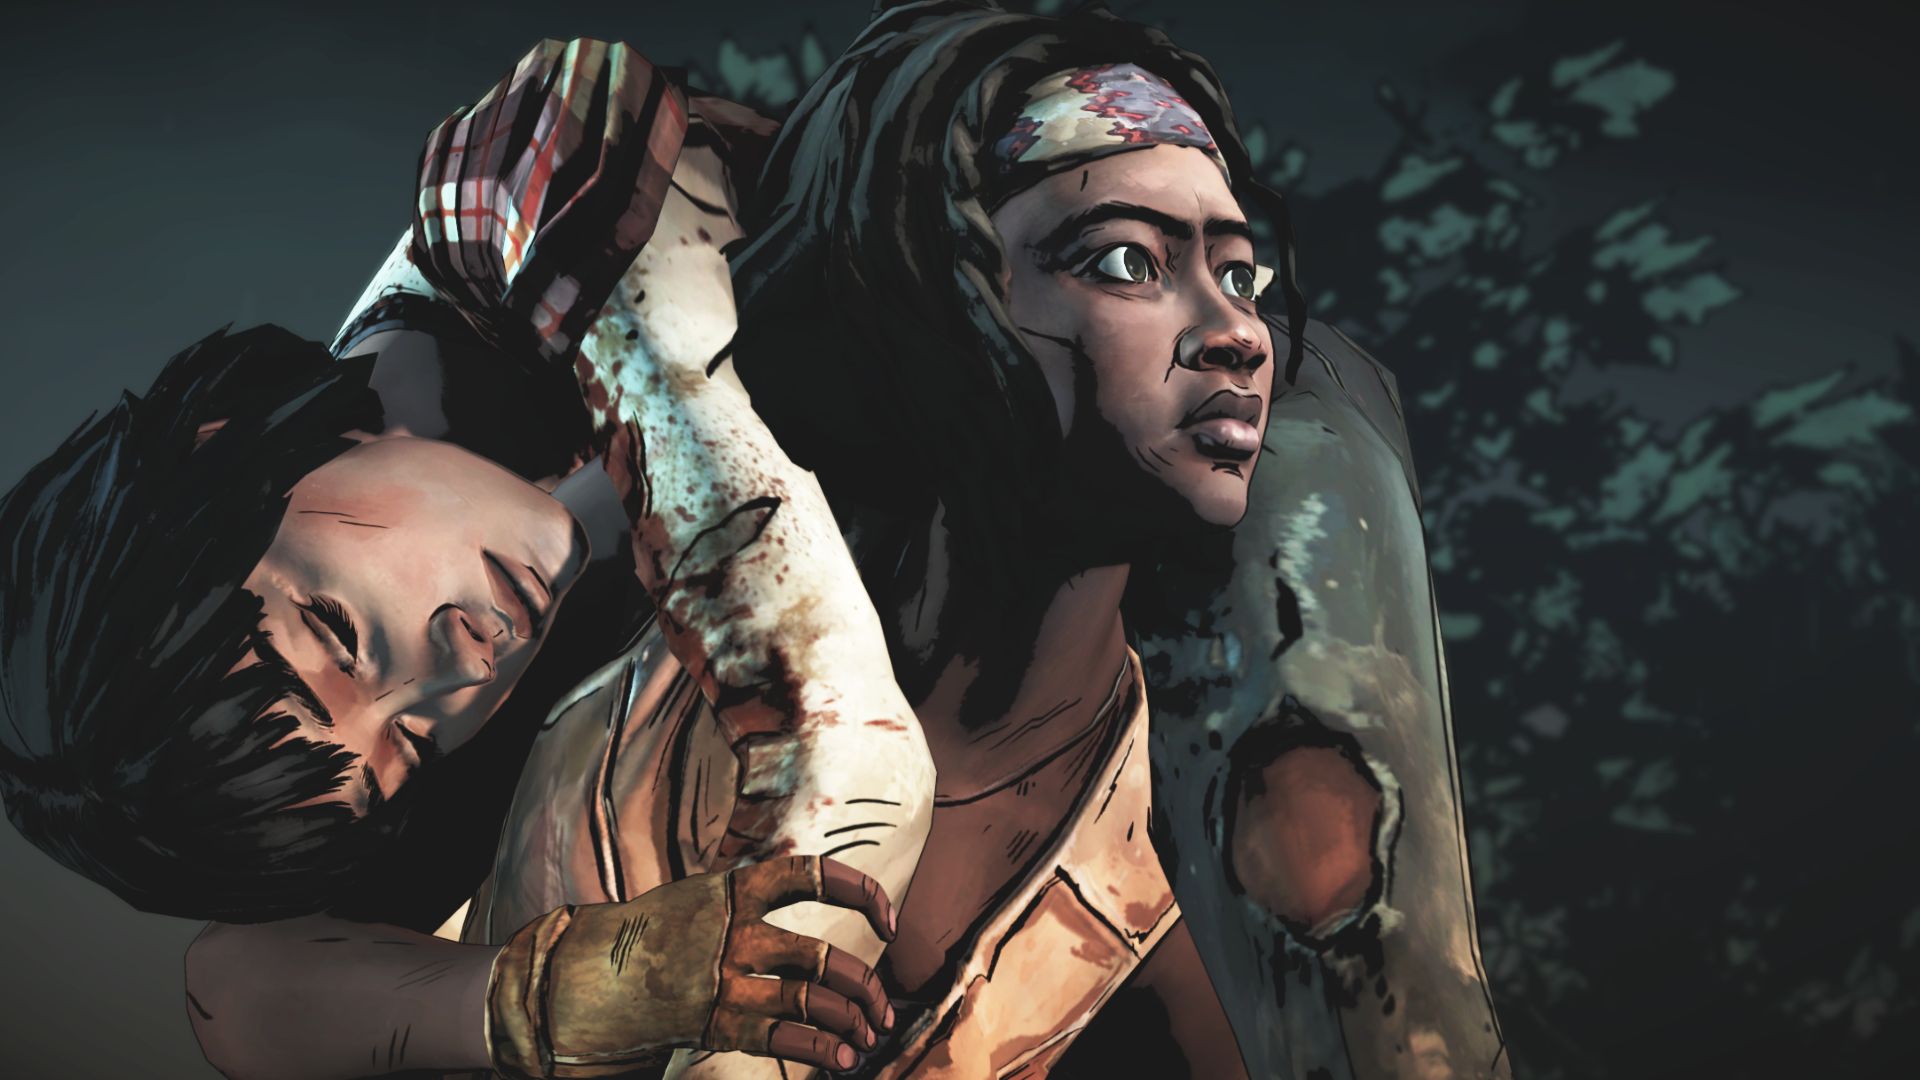 Kirkman's Skybound Games to See Telltale's The Walking Dead to Completion